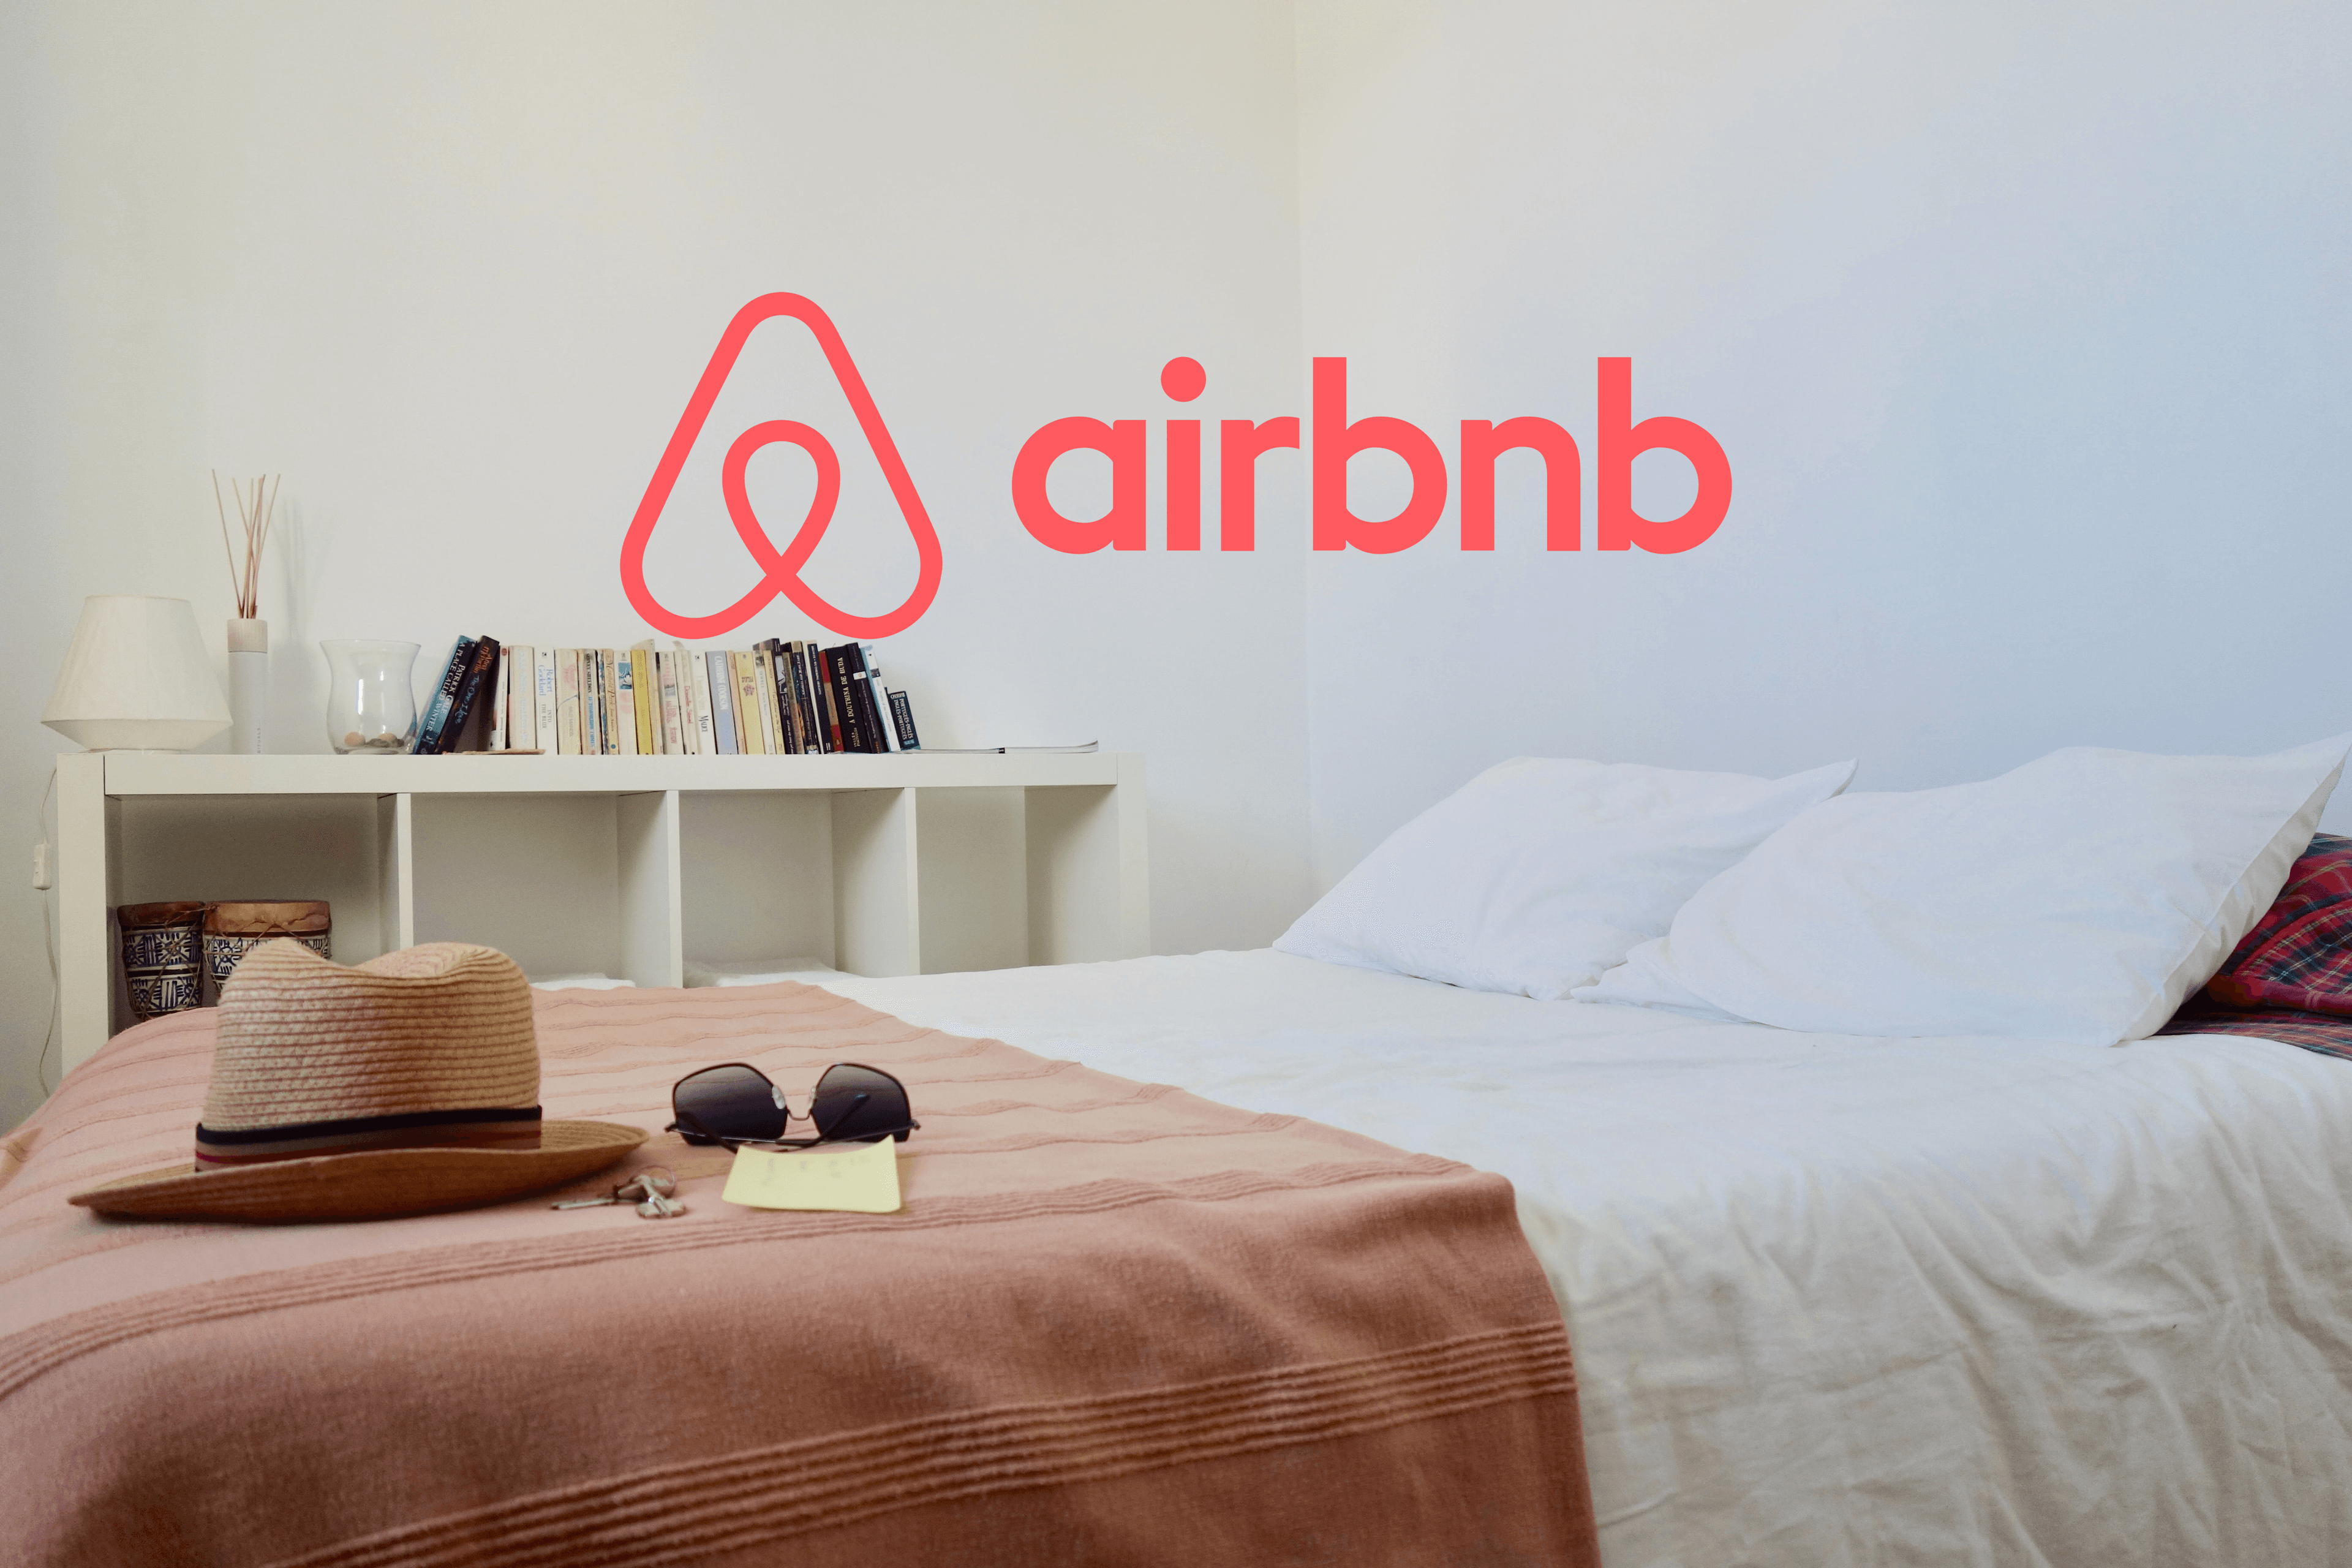 Bed with Airbnb logo